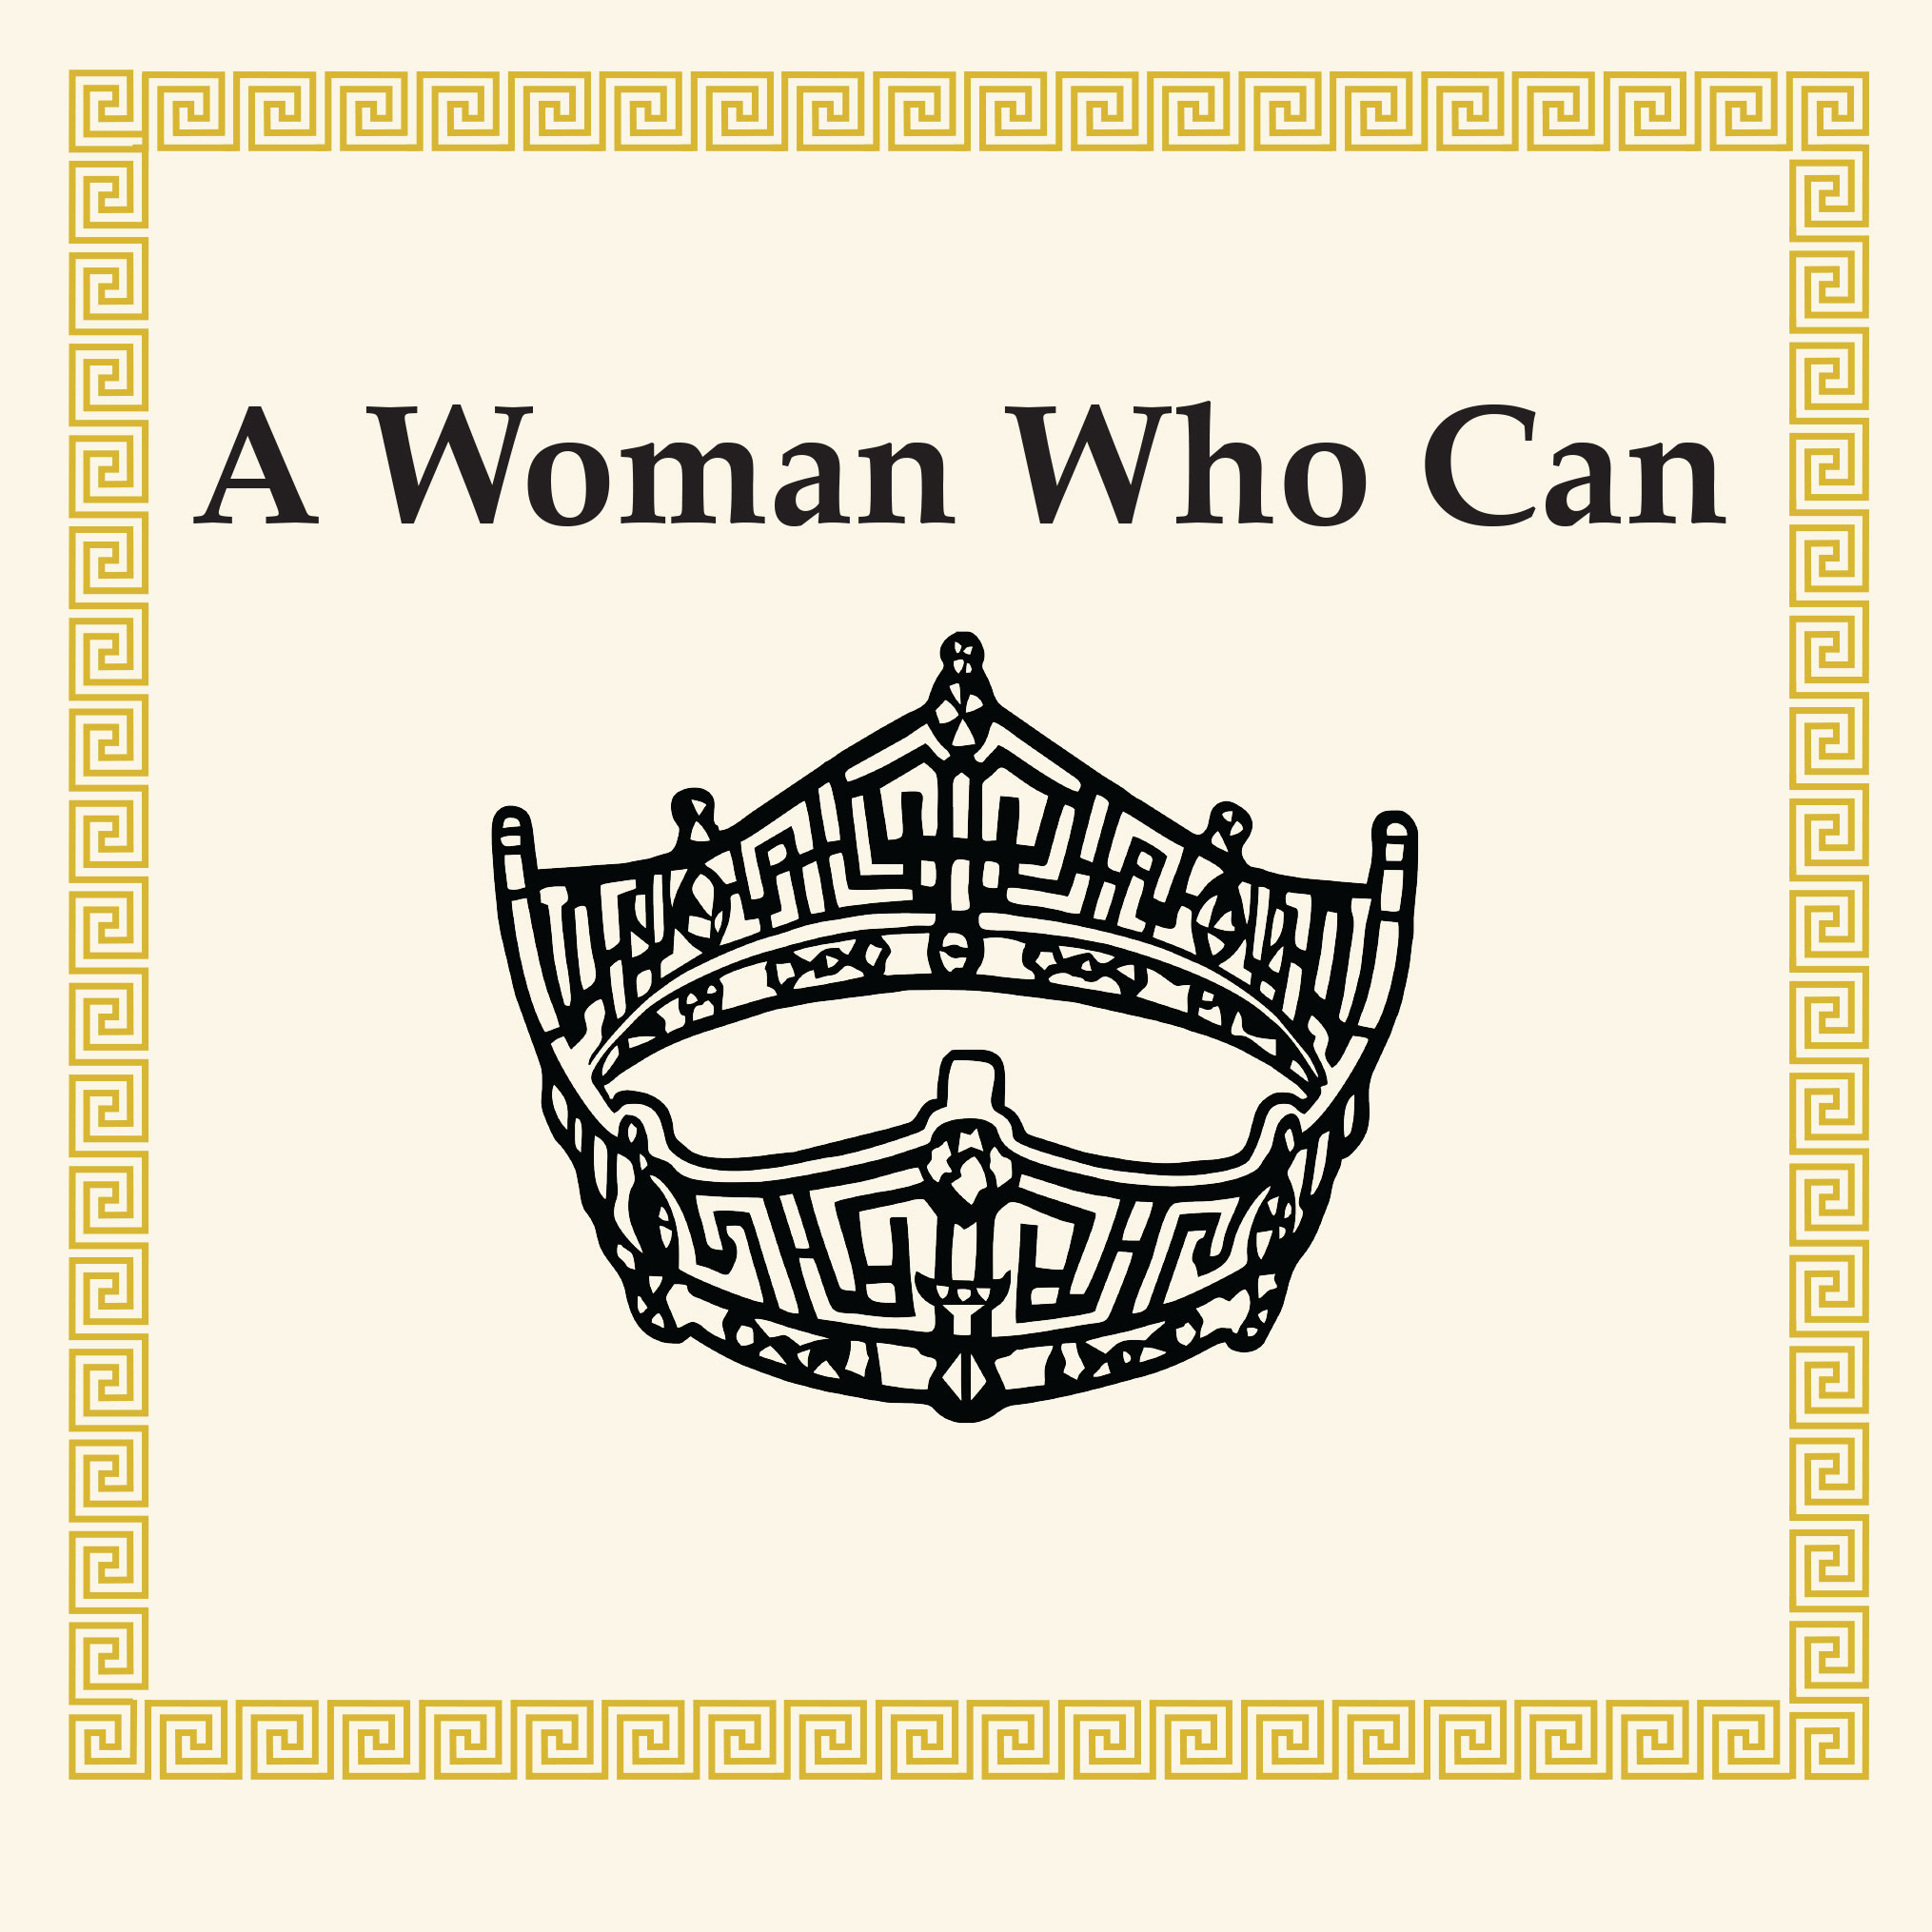 A Woman Who Can logo